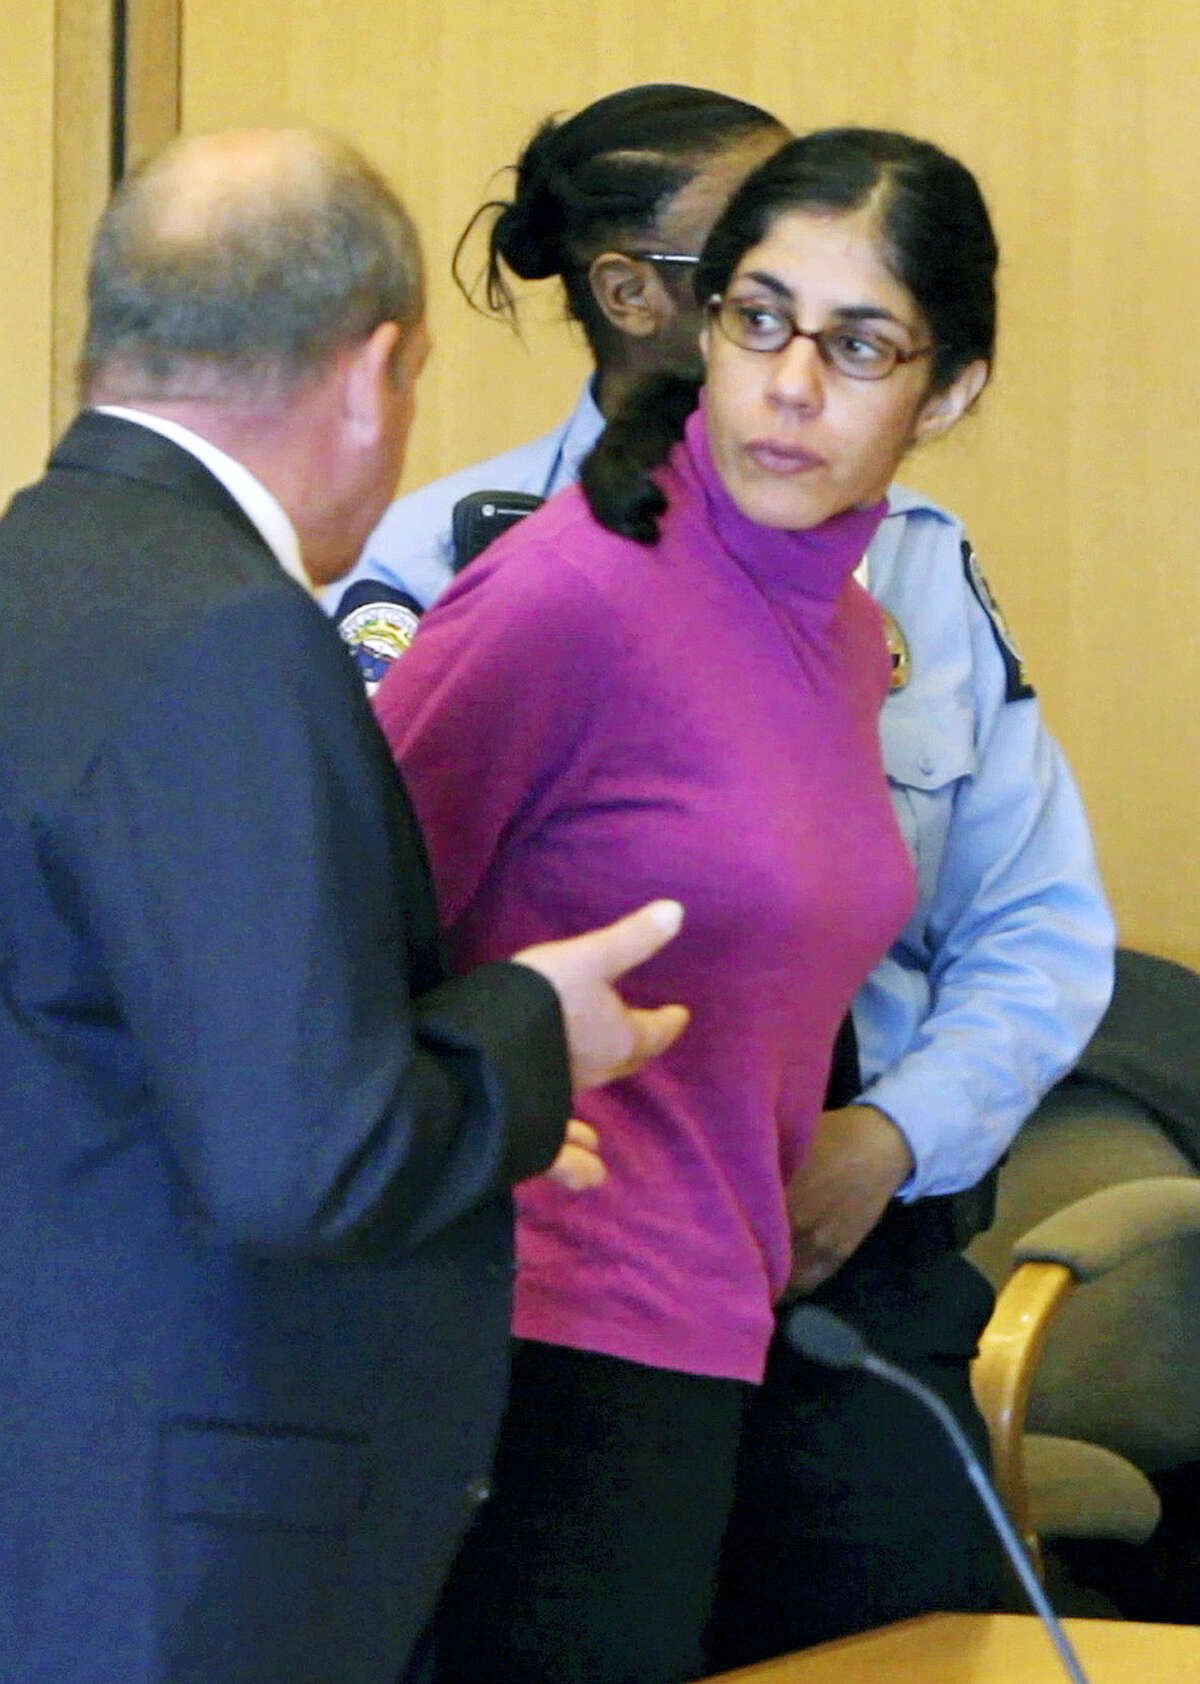 In this April 27, 2012 file photo, Sheila Davalloo looks back in Superior Court in Stamford Conn., following her sentencing for the 2002 murder of Anna Lisa Raymundo. The Connecticut Supreme Court ruled Thursday, Dec. 31, 2015, against an appeal by Davallo, saying that a state law protecting married couple’s conversations as confidential does not apply to the convicted killer, who protested the use of self-incriminating comments she made to her husband as evidence against her at trial.